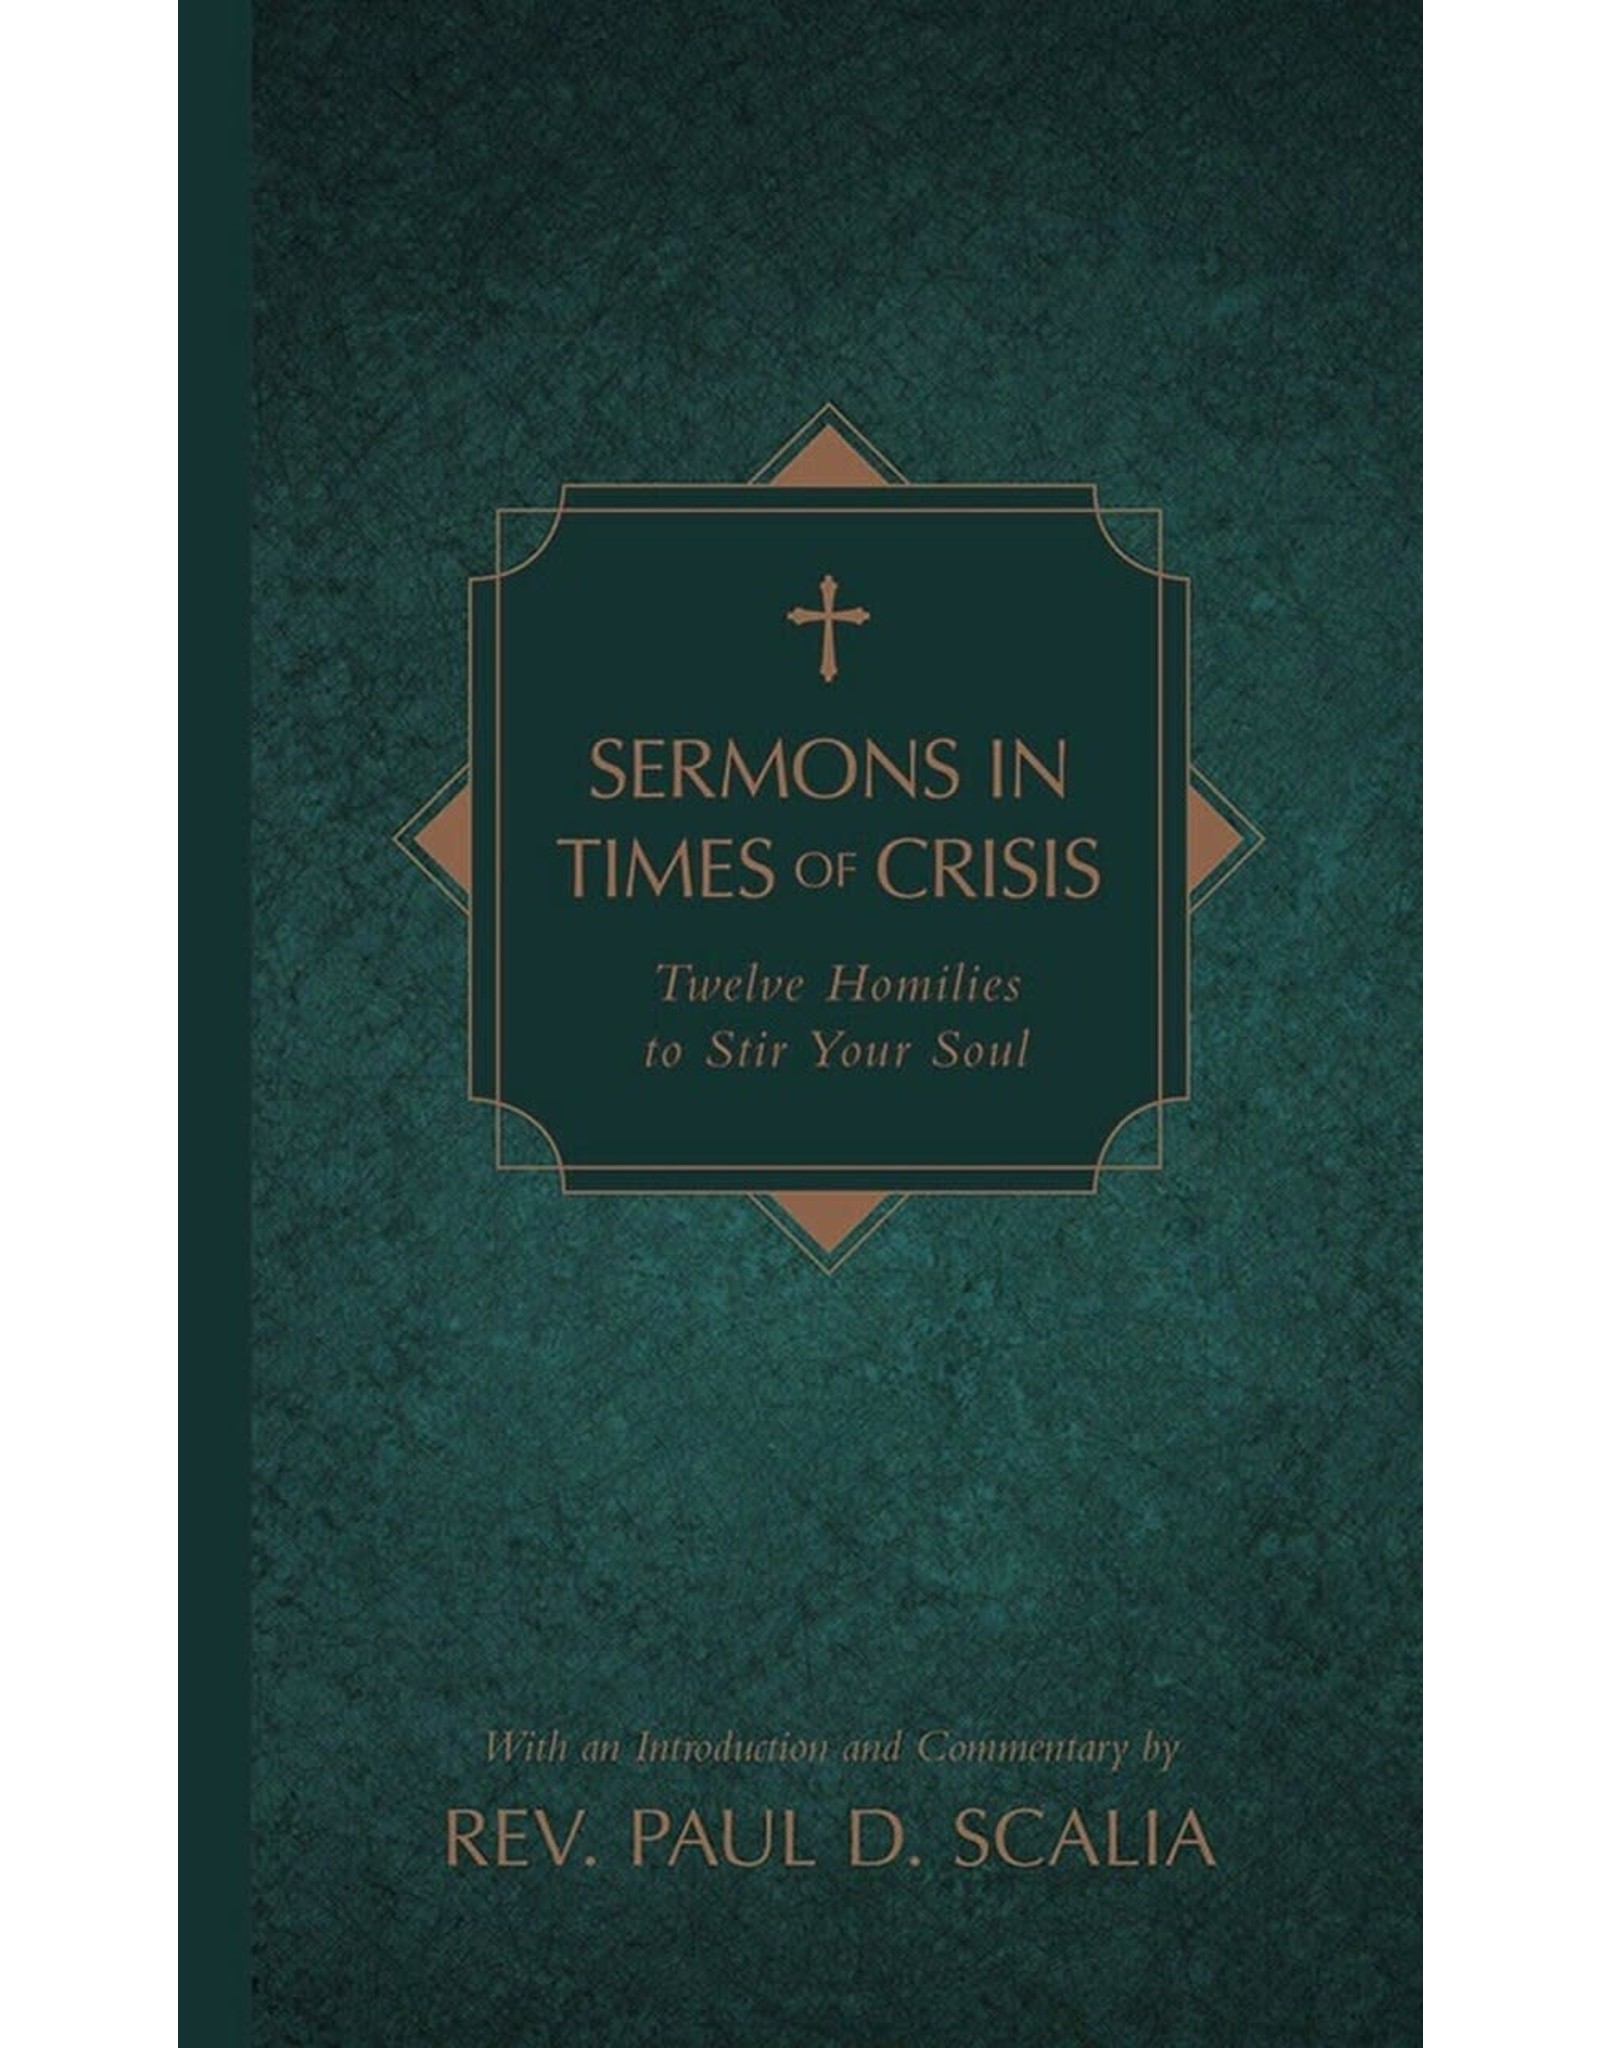 Tan Books Sermons In Times Of Crisis: Twelve Homilies To Stir Your Soul by Rev. Paul D. Scalia (Hardcover)